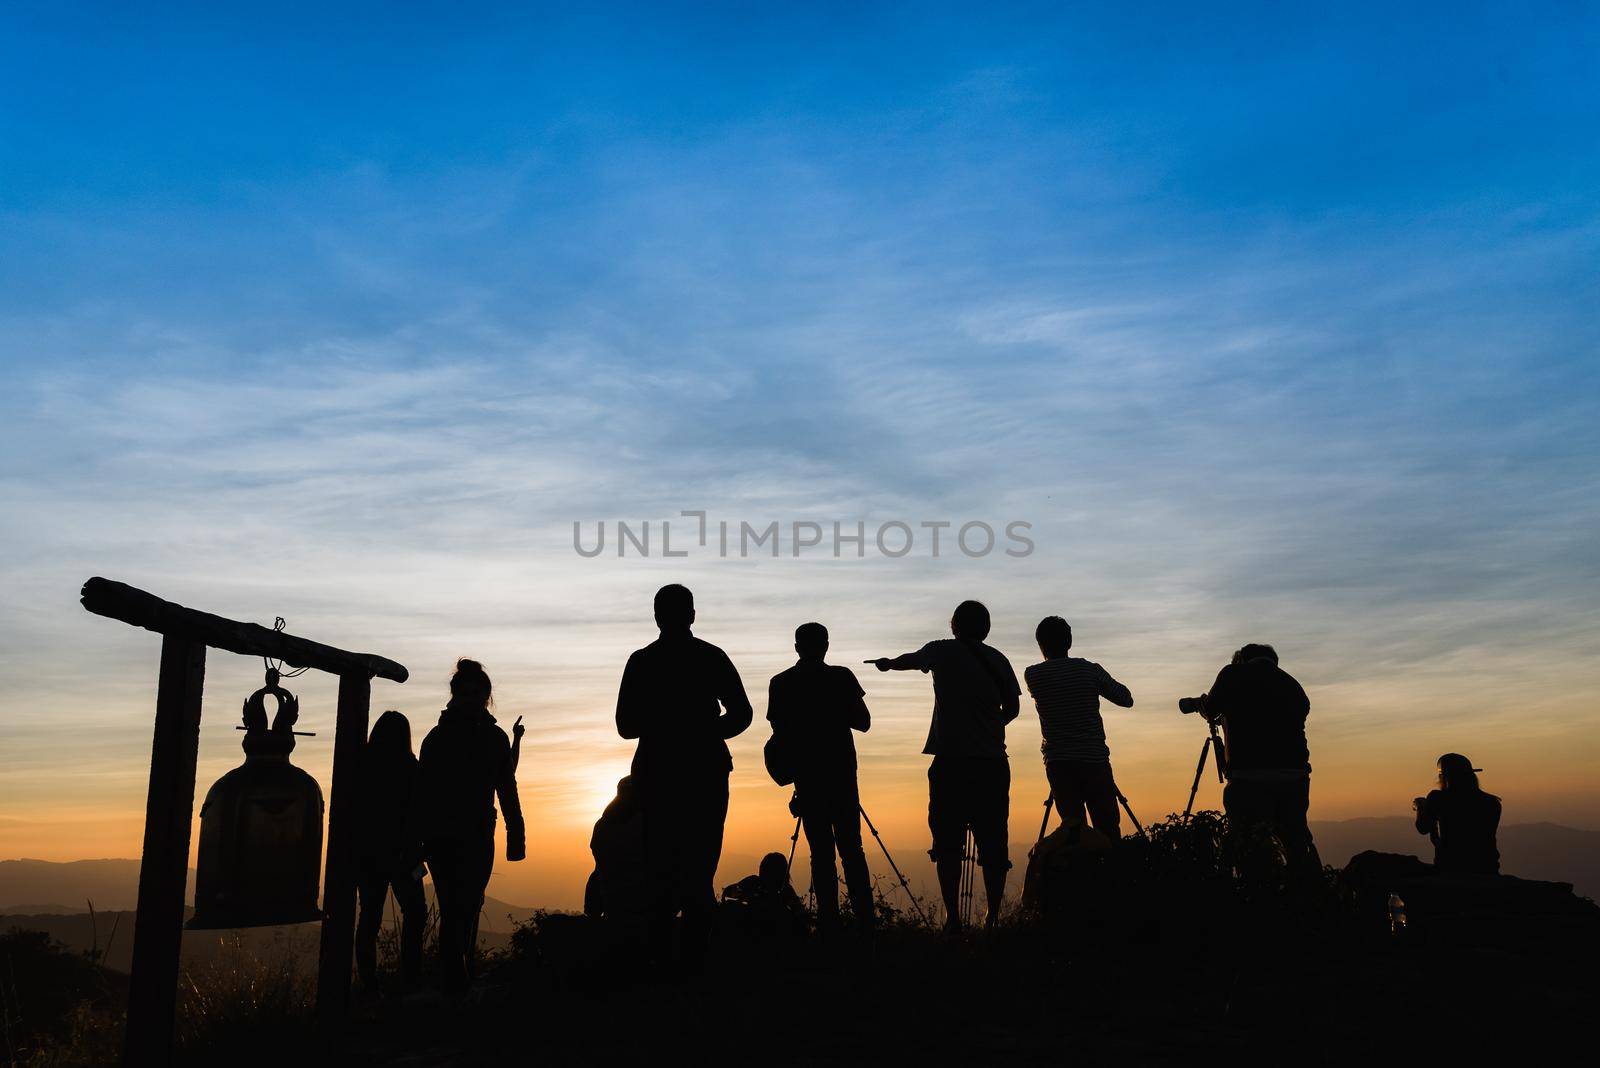 Photographers Silhouettes On Cliff Against Colorful Twilight Sky by Wmpix